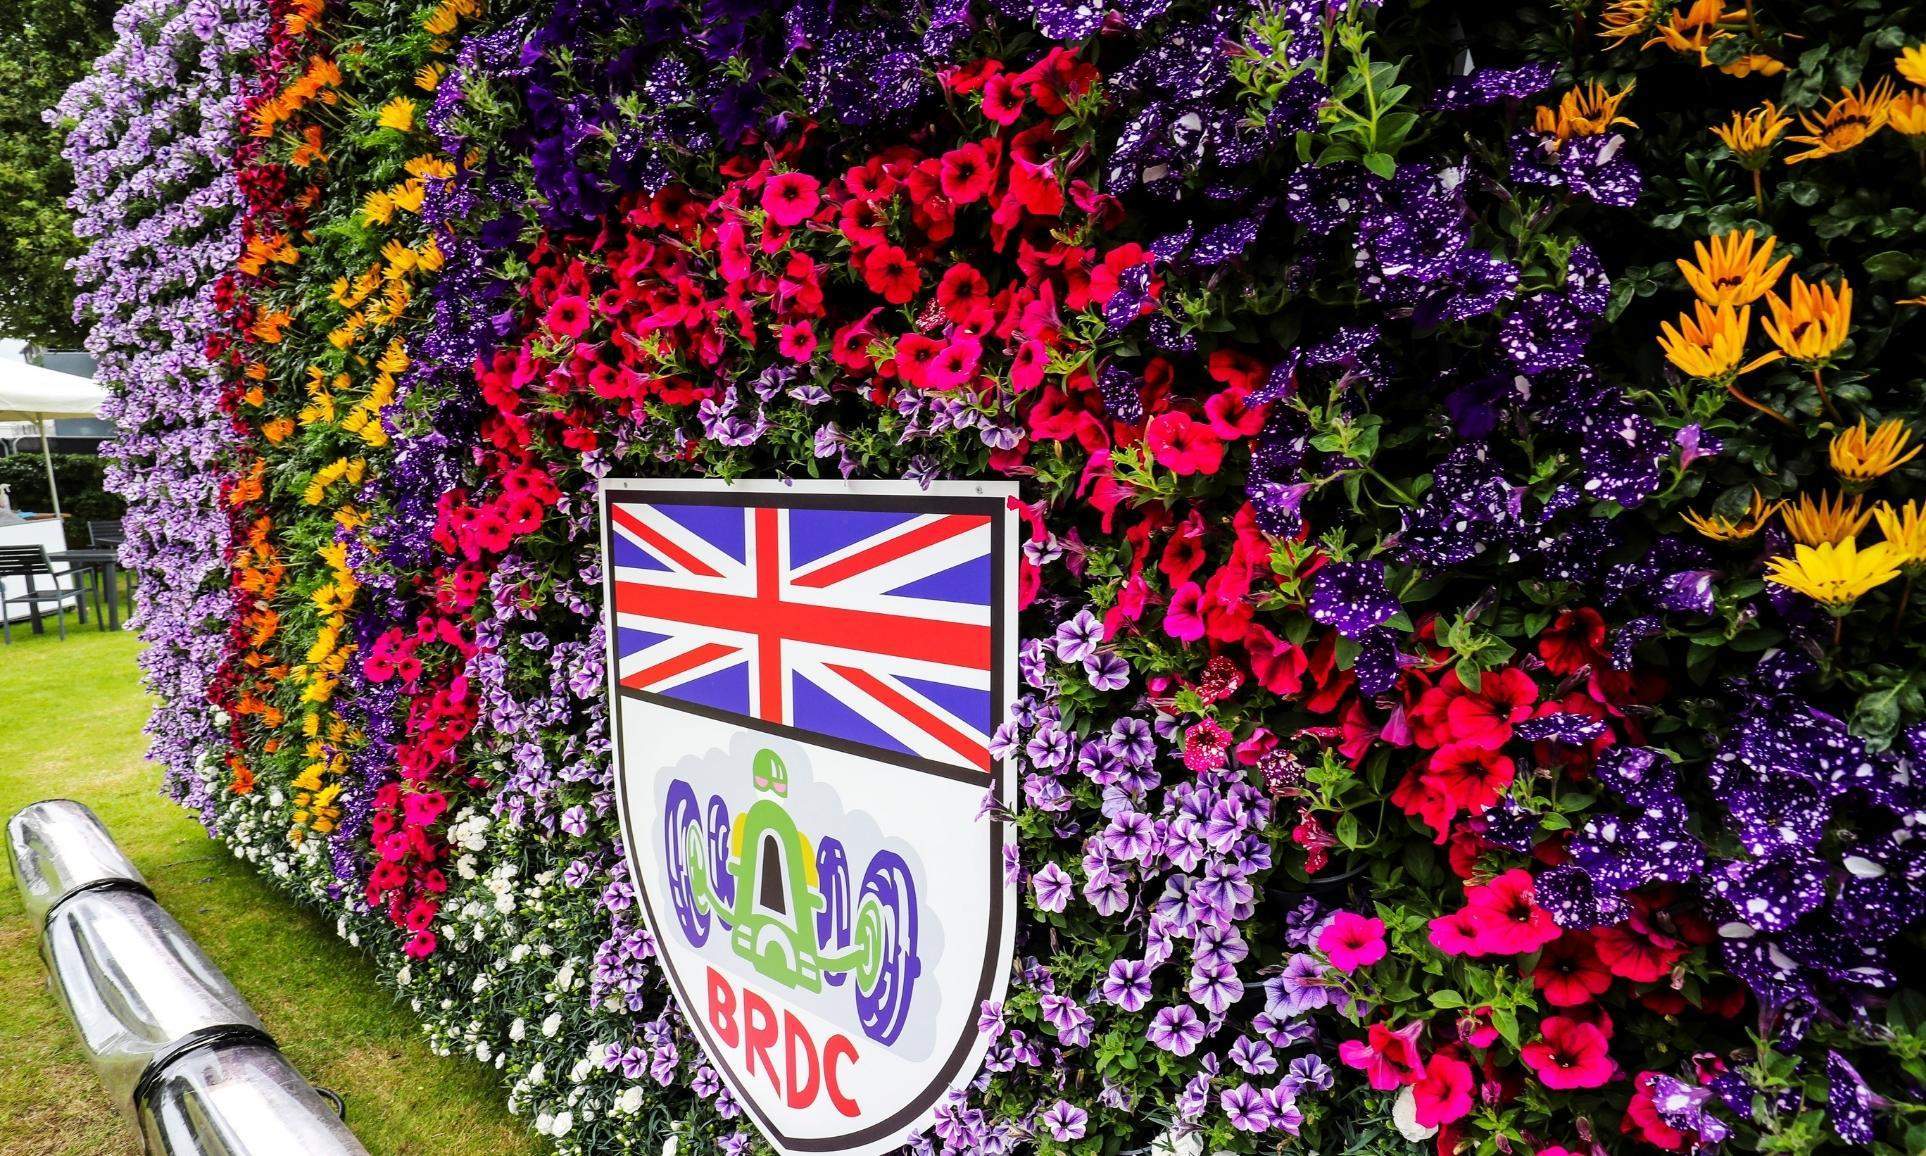 This is an image of a rainbow wall of plants with BRDC logo signage displayed in the centre.